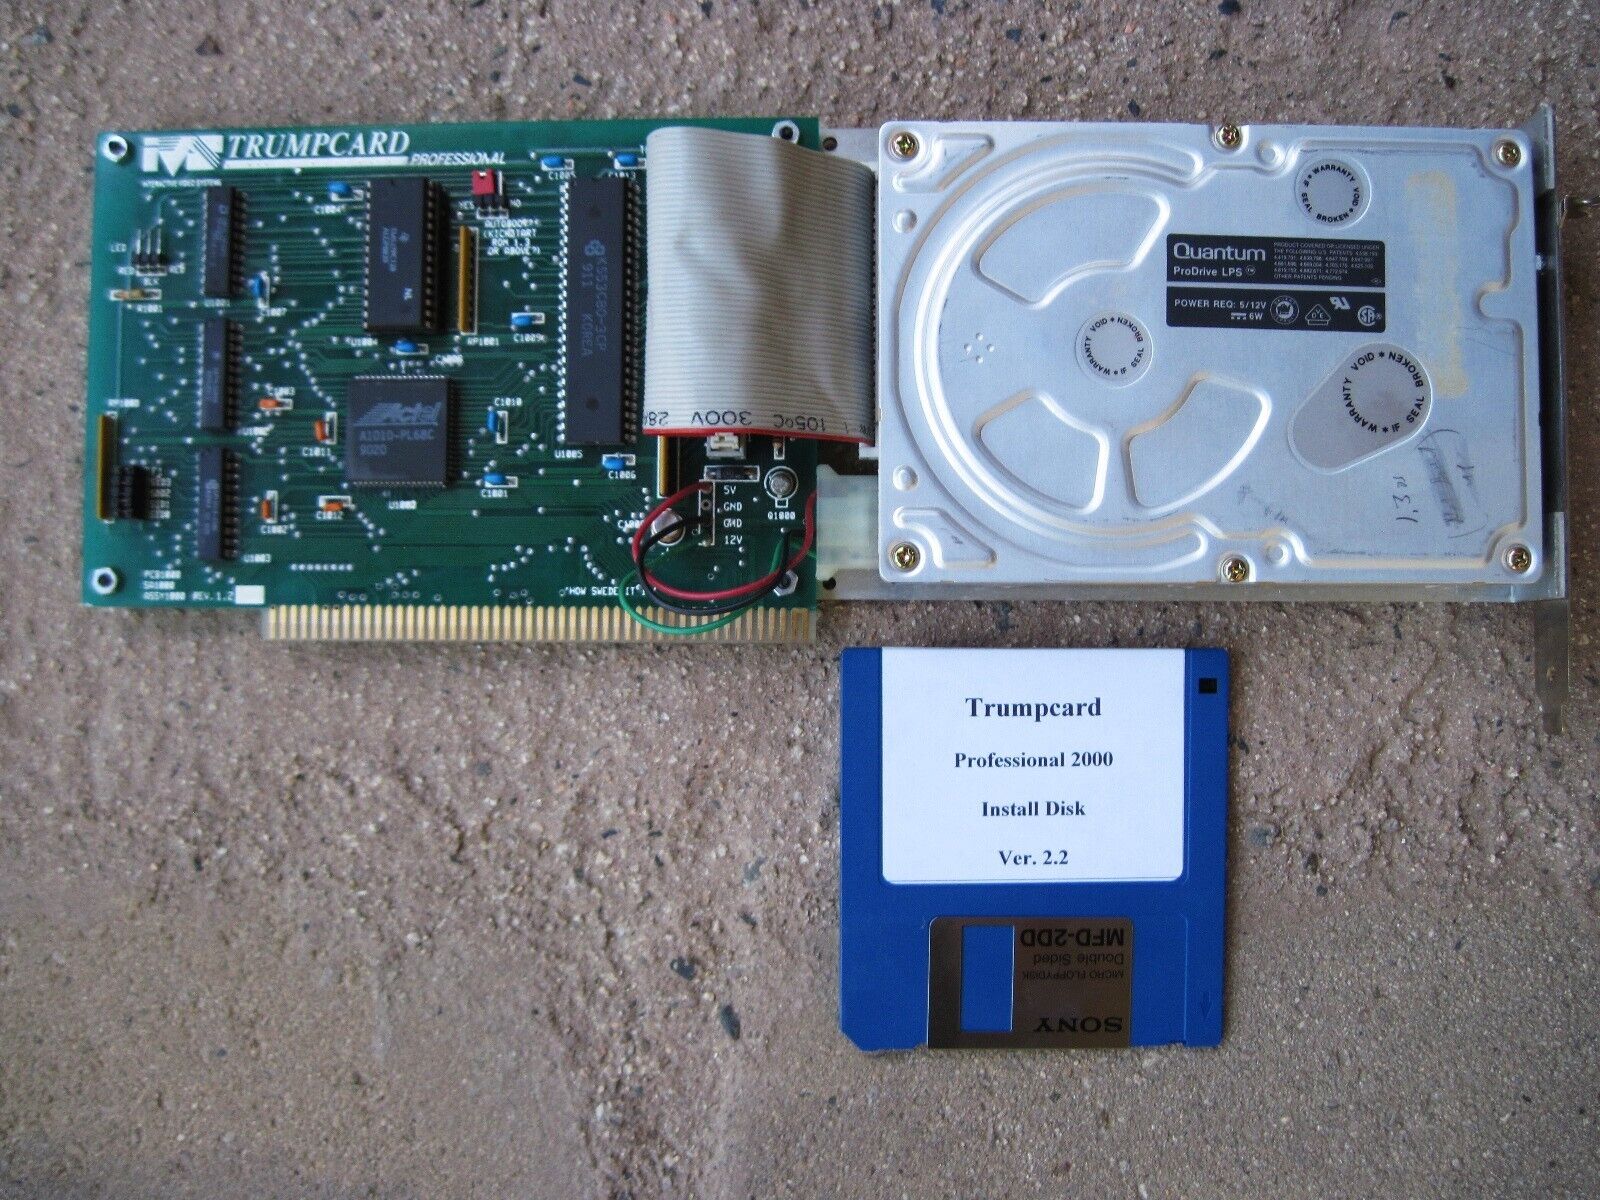 Amiga ISV Trump Professional 2000 SCSI Card with a 52mb Harddrive with OS 1.3